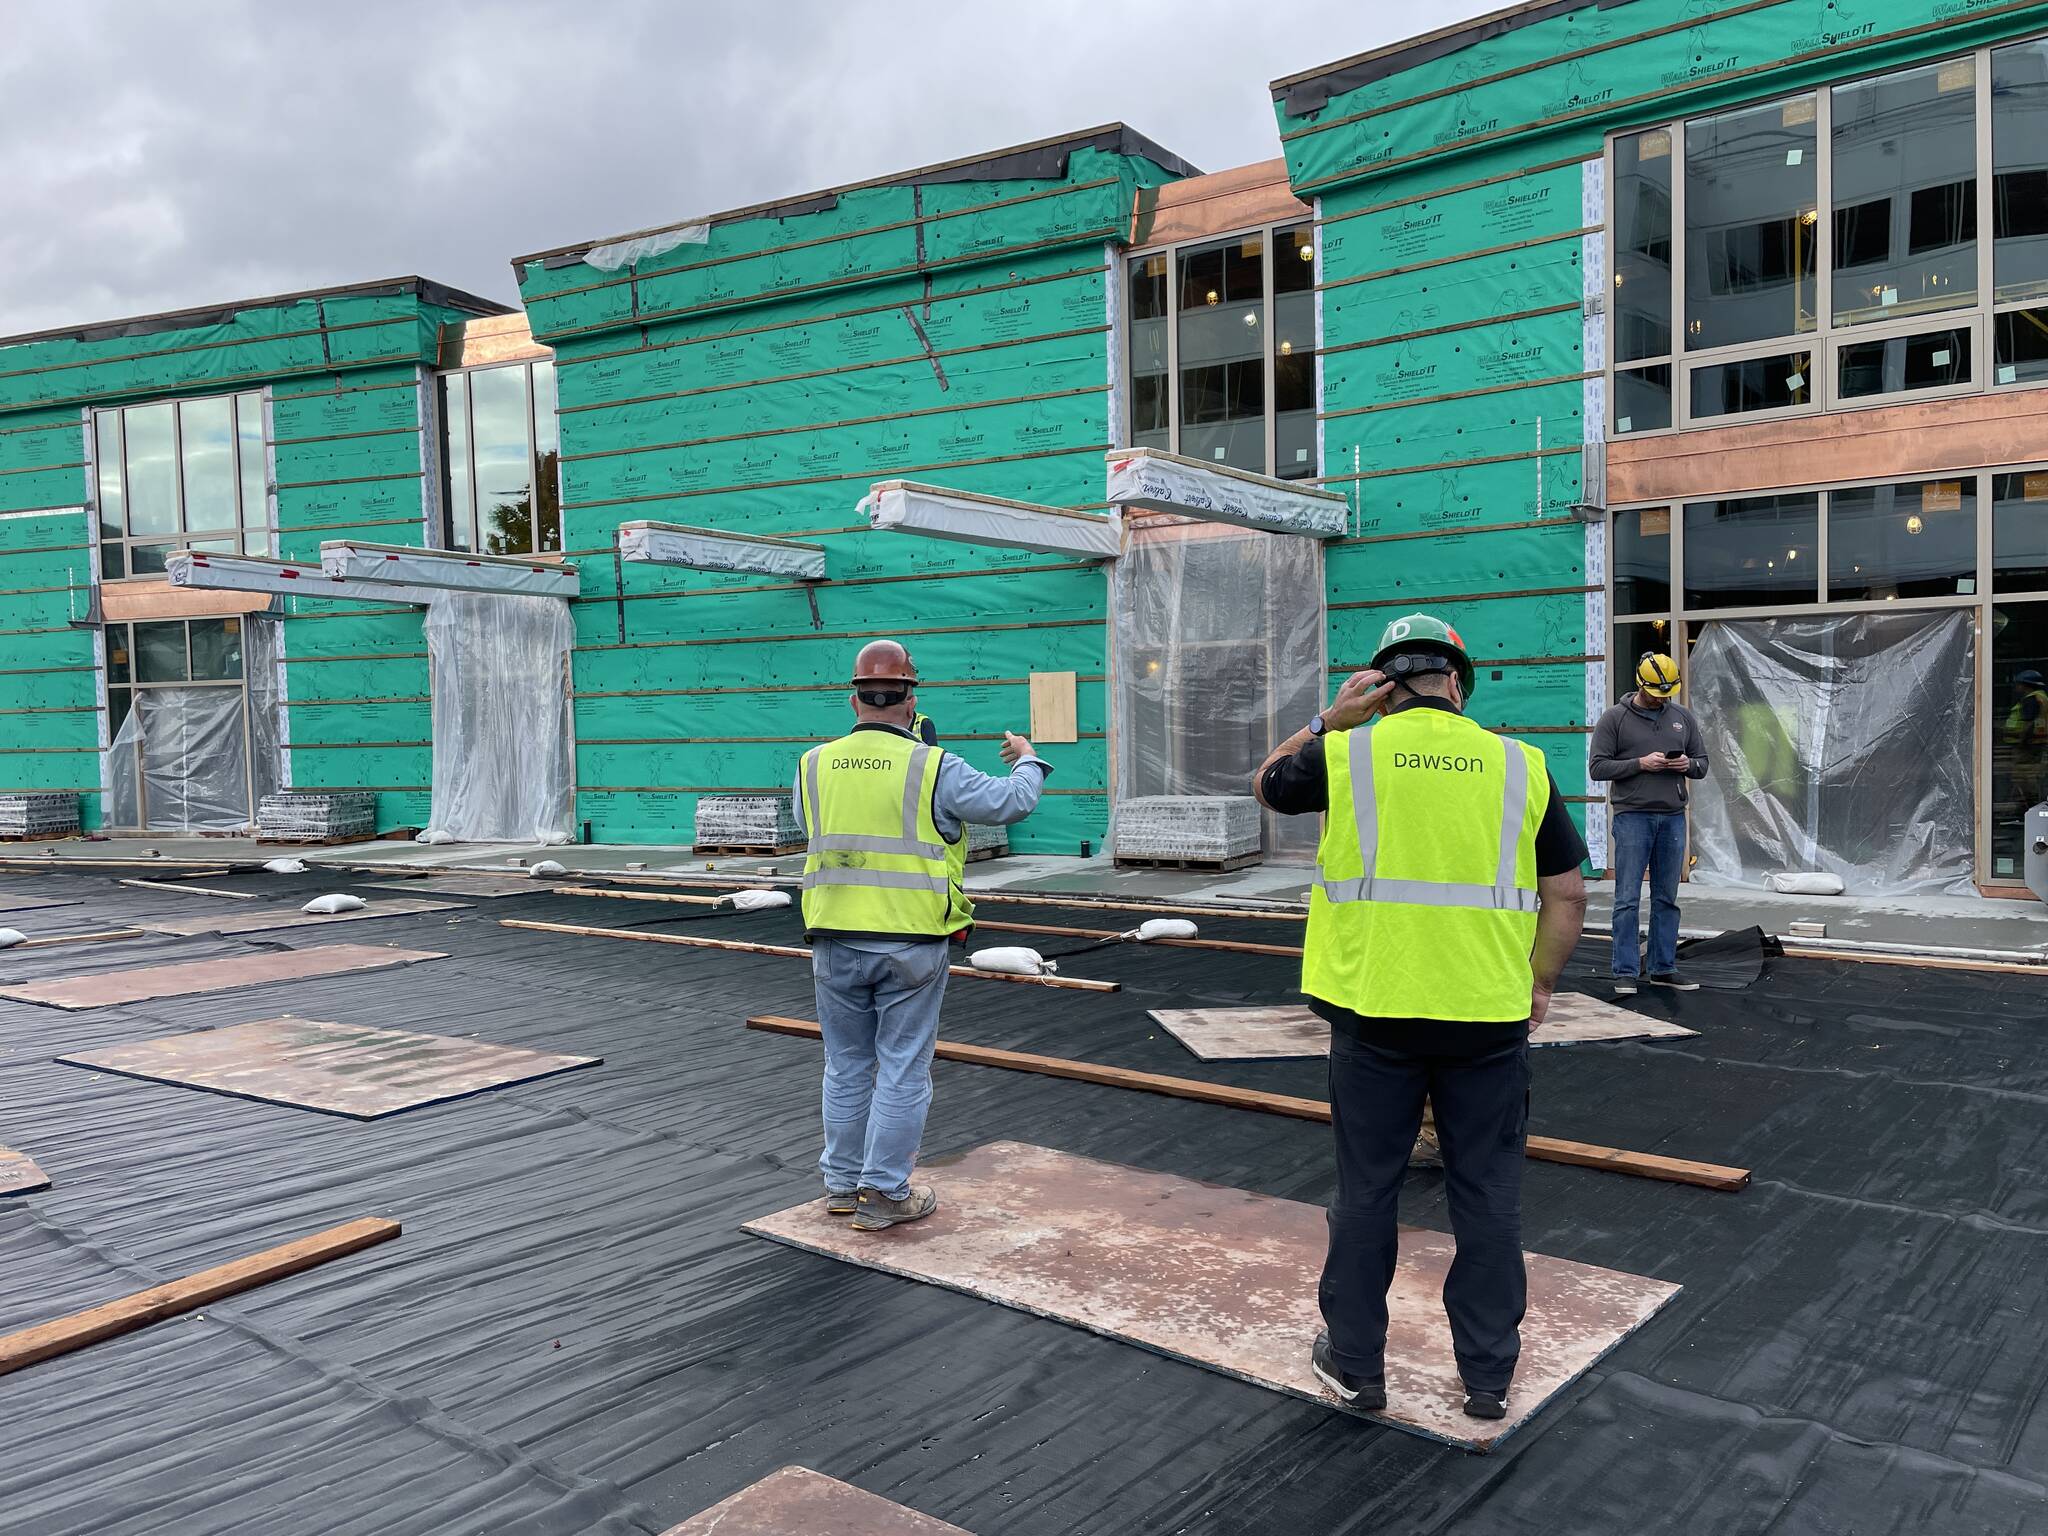 Workers make progress on the Sealaska Heritage Institute's Northwest Coast arts campus on Sept. 24. Supply chain issues and material shortages have been a factor for local construction projects this year. (Michael S. Lockett/Juneau Empire)